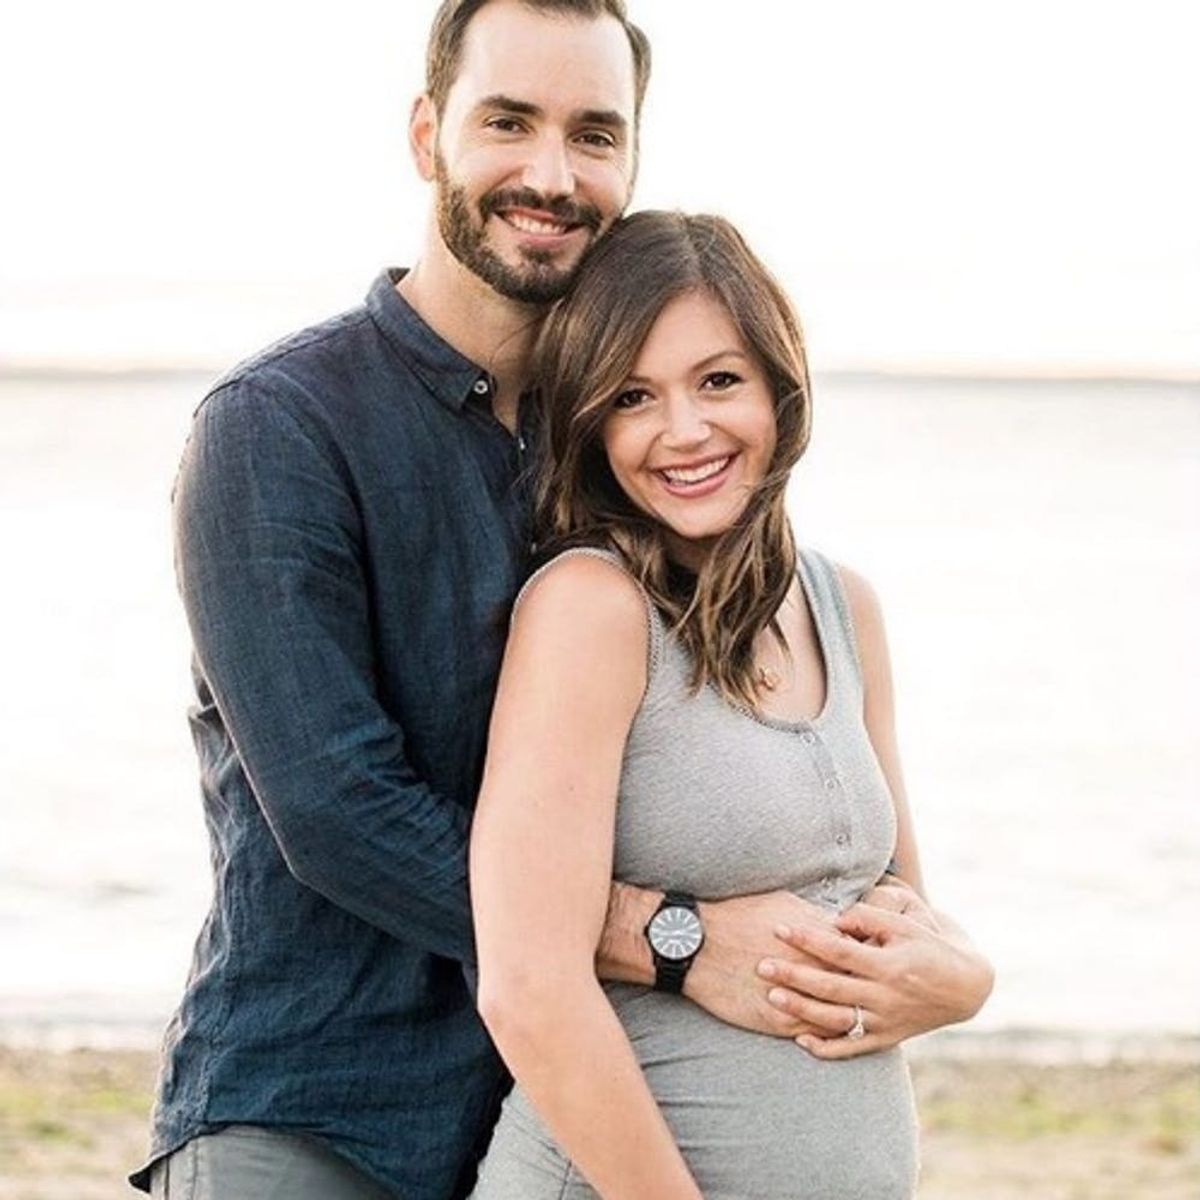 The Bachelorette’s Desirée Hartsock and Chris Siegfried Just Welcomed Their First Baby, and His Name Is Adorable